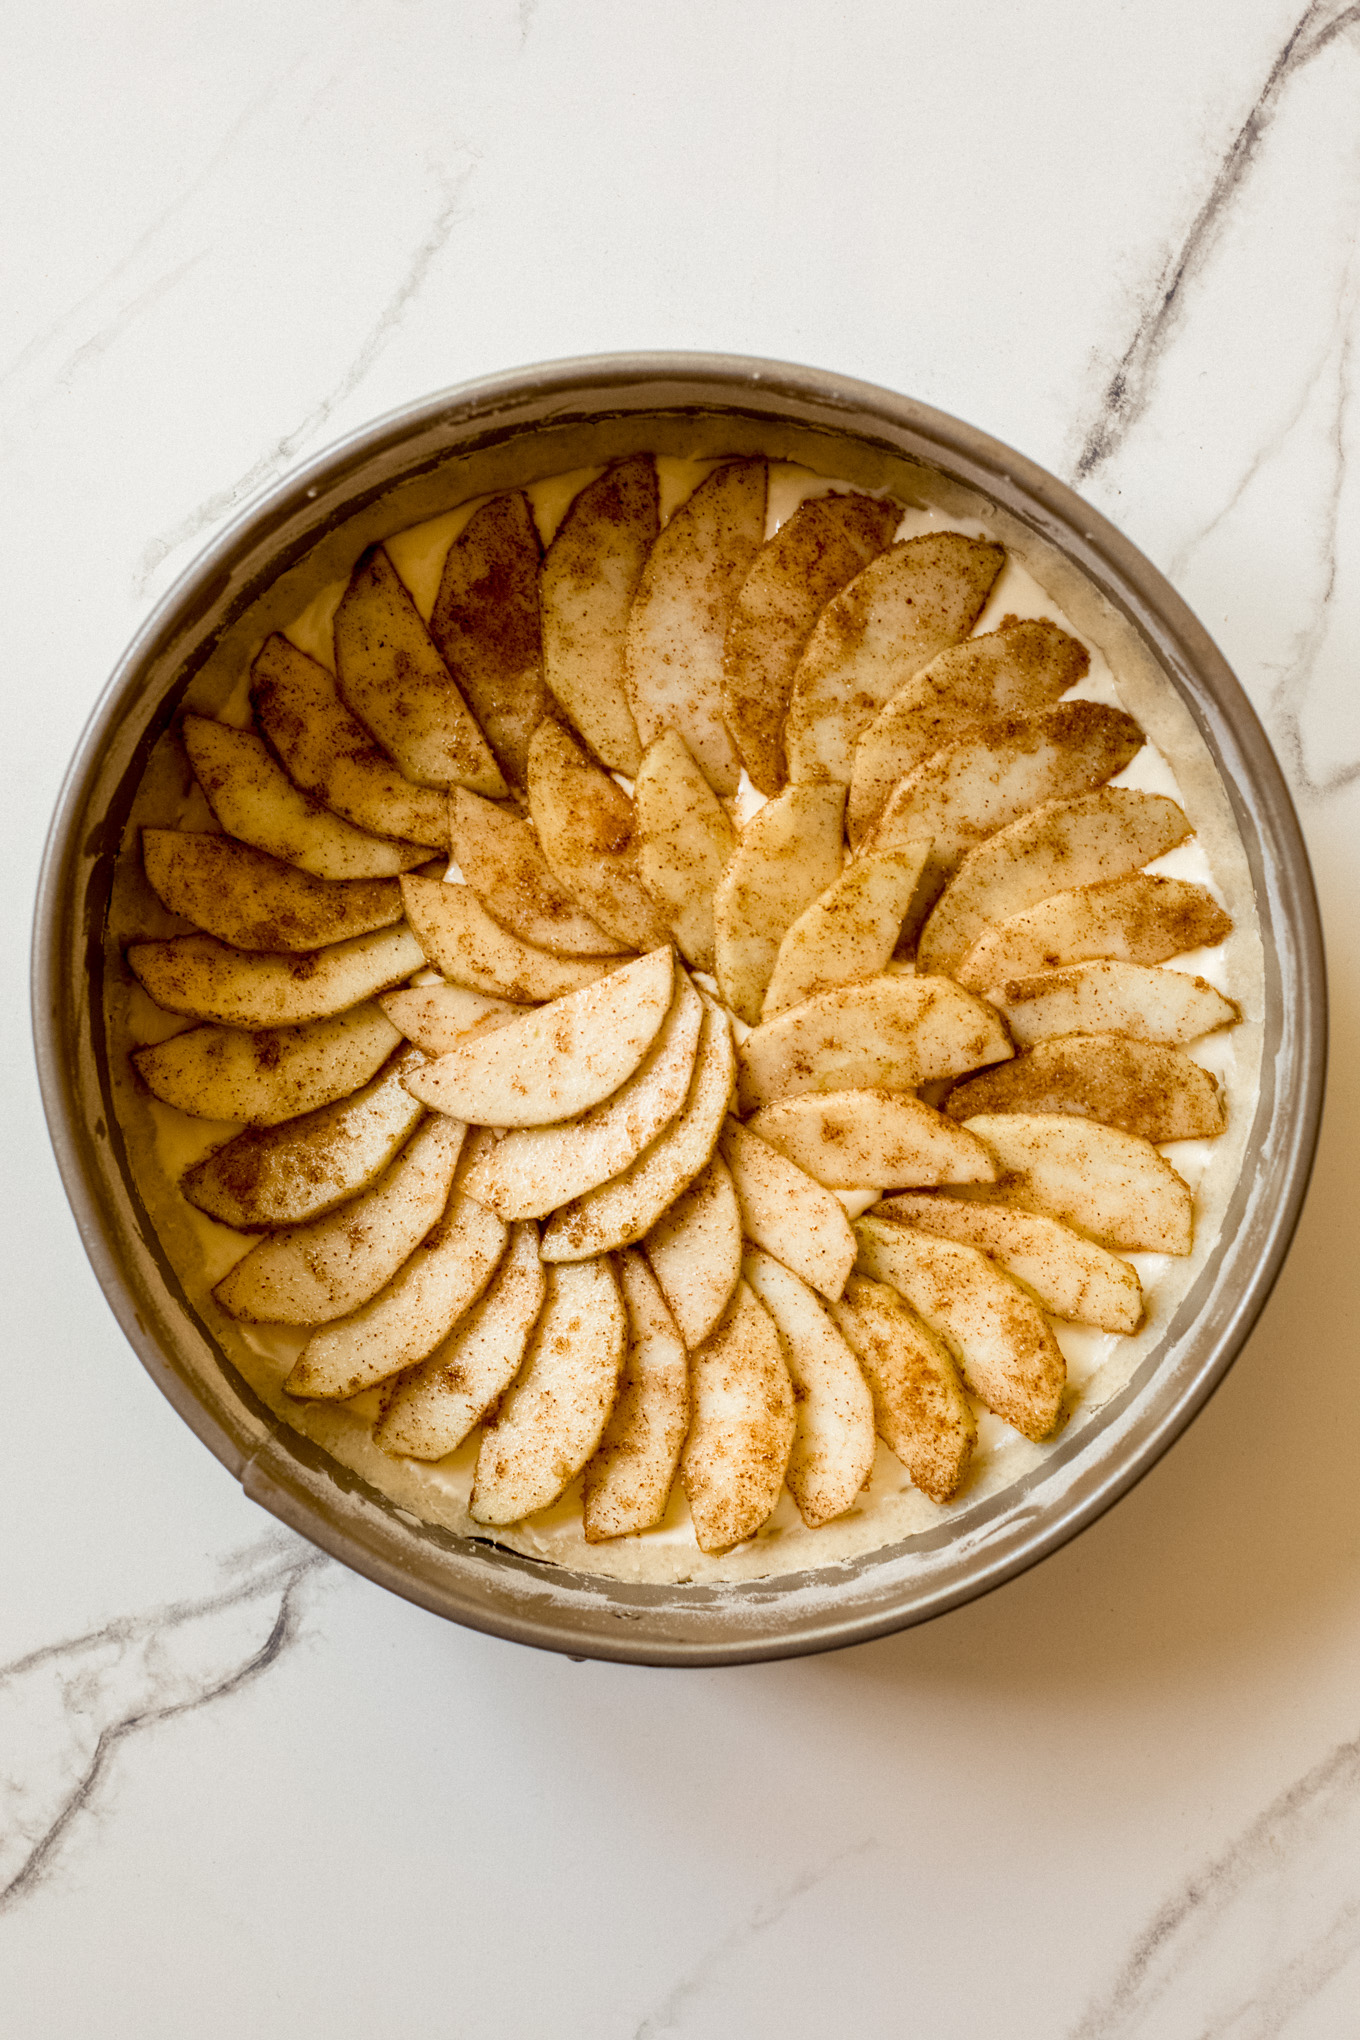 apple slices spread over the tart.